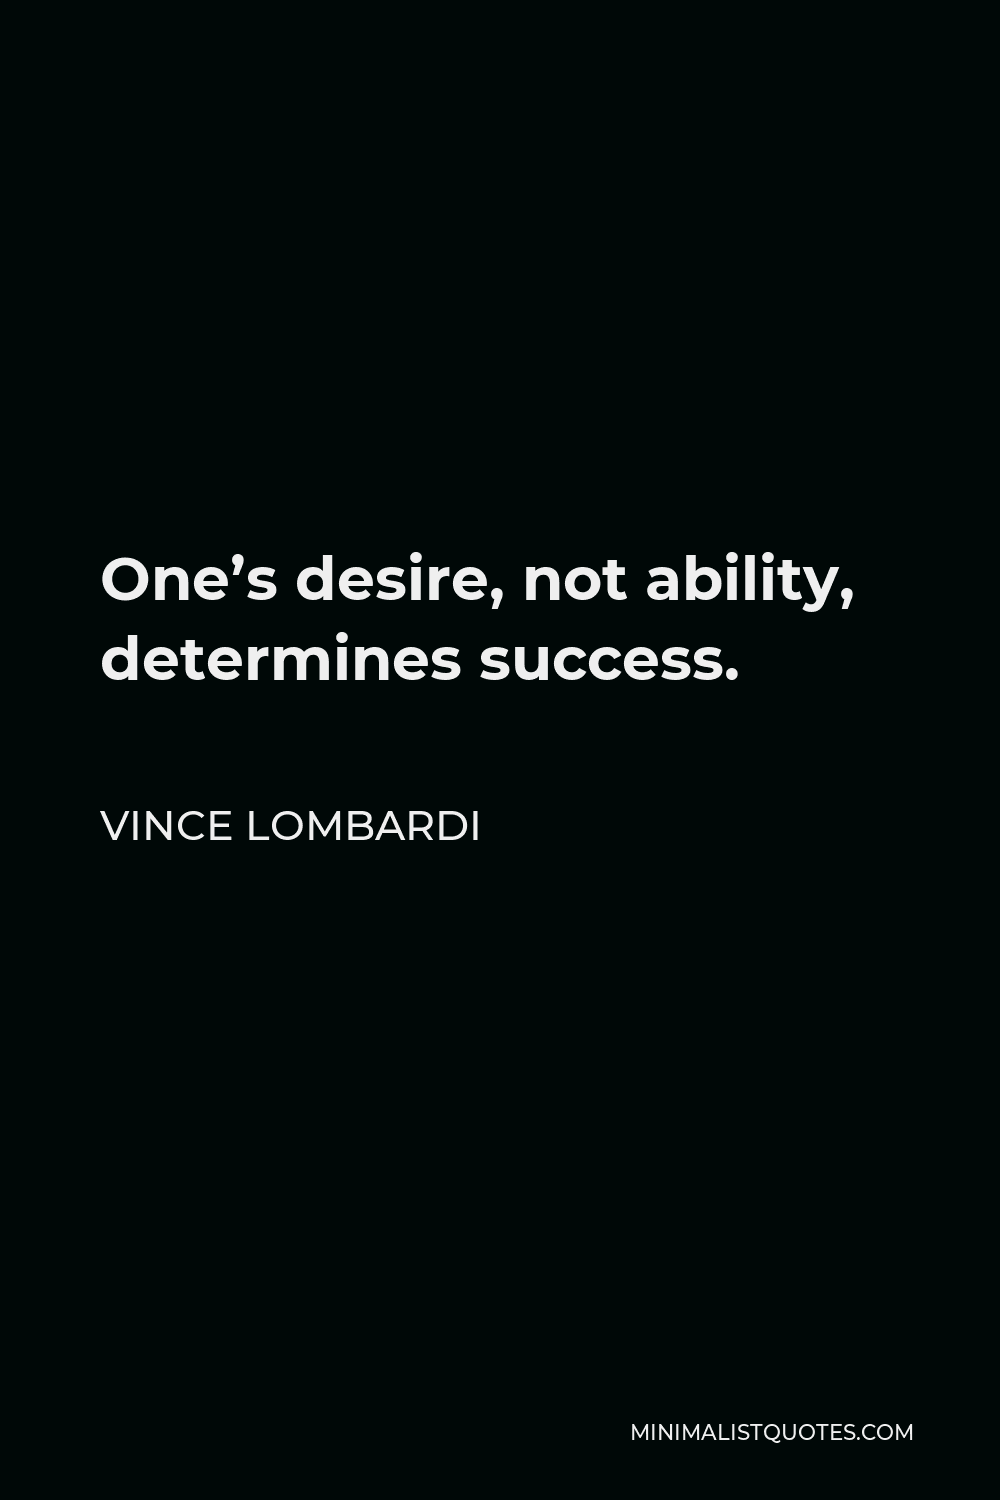 Vince Lombardi Quote - One’s desire, not ability, determines success.